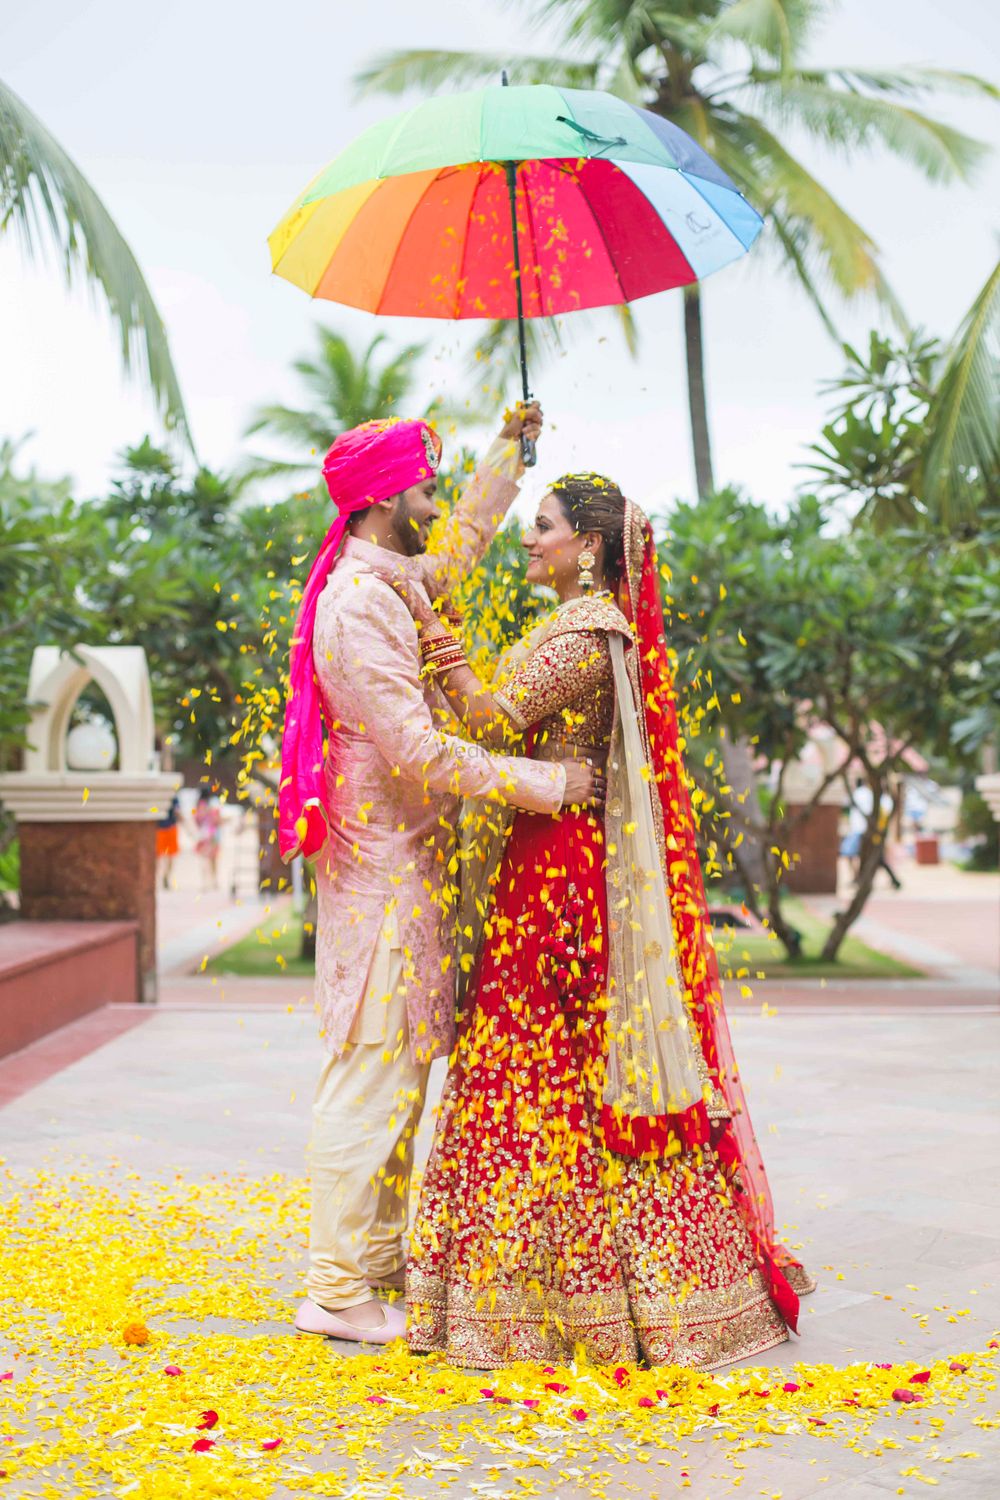 Photo of Couple Portrait with Umbrella and Petals